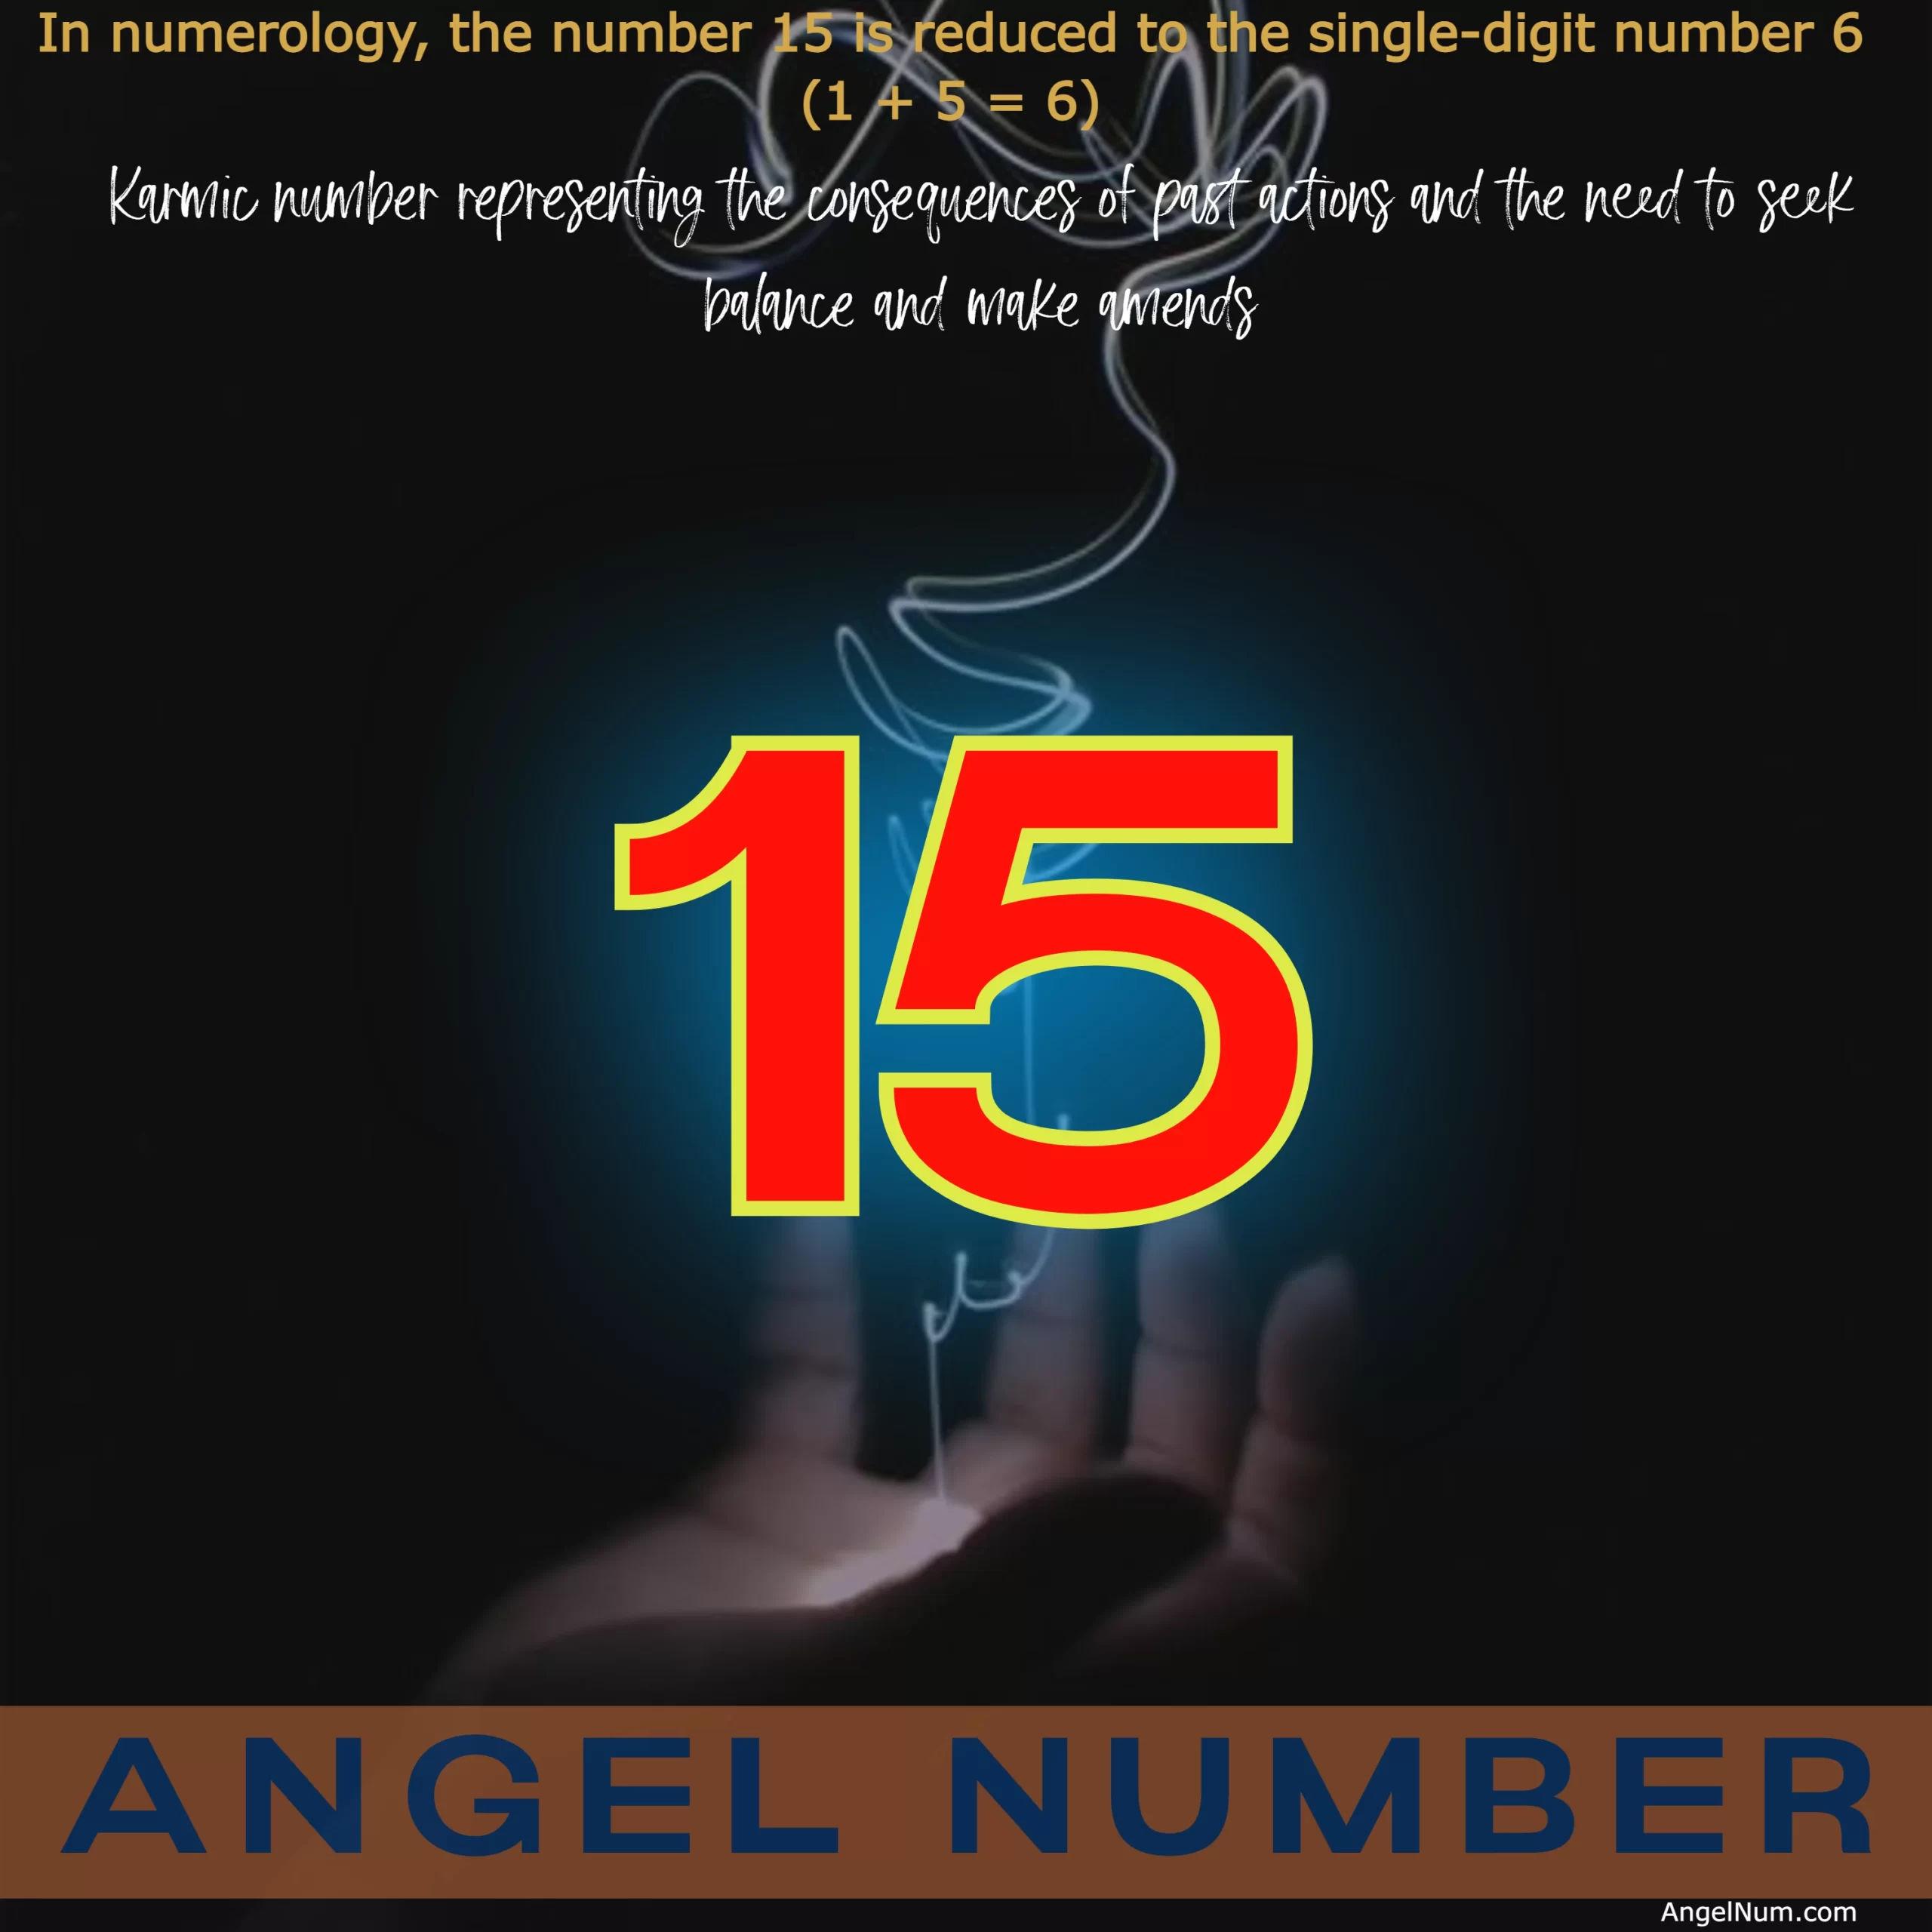 Angel Number 15: The Spiritual Significance and Symbolism